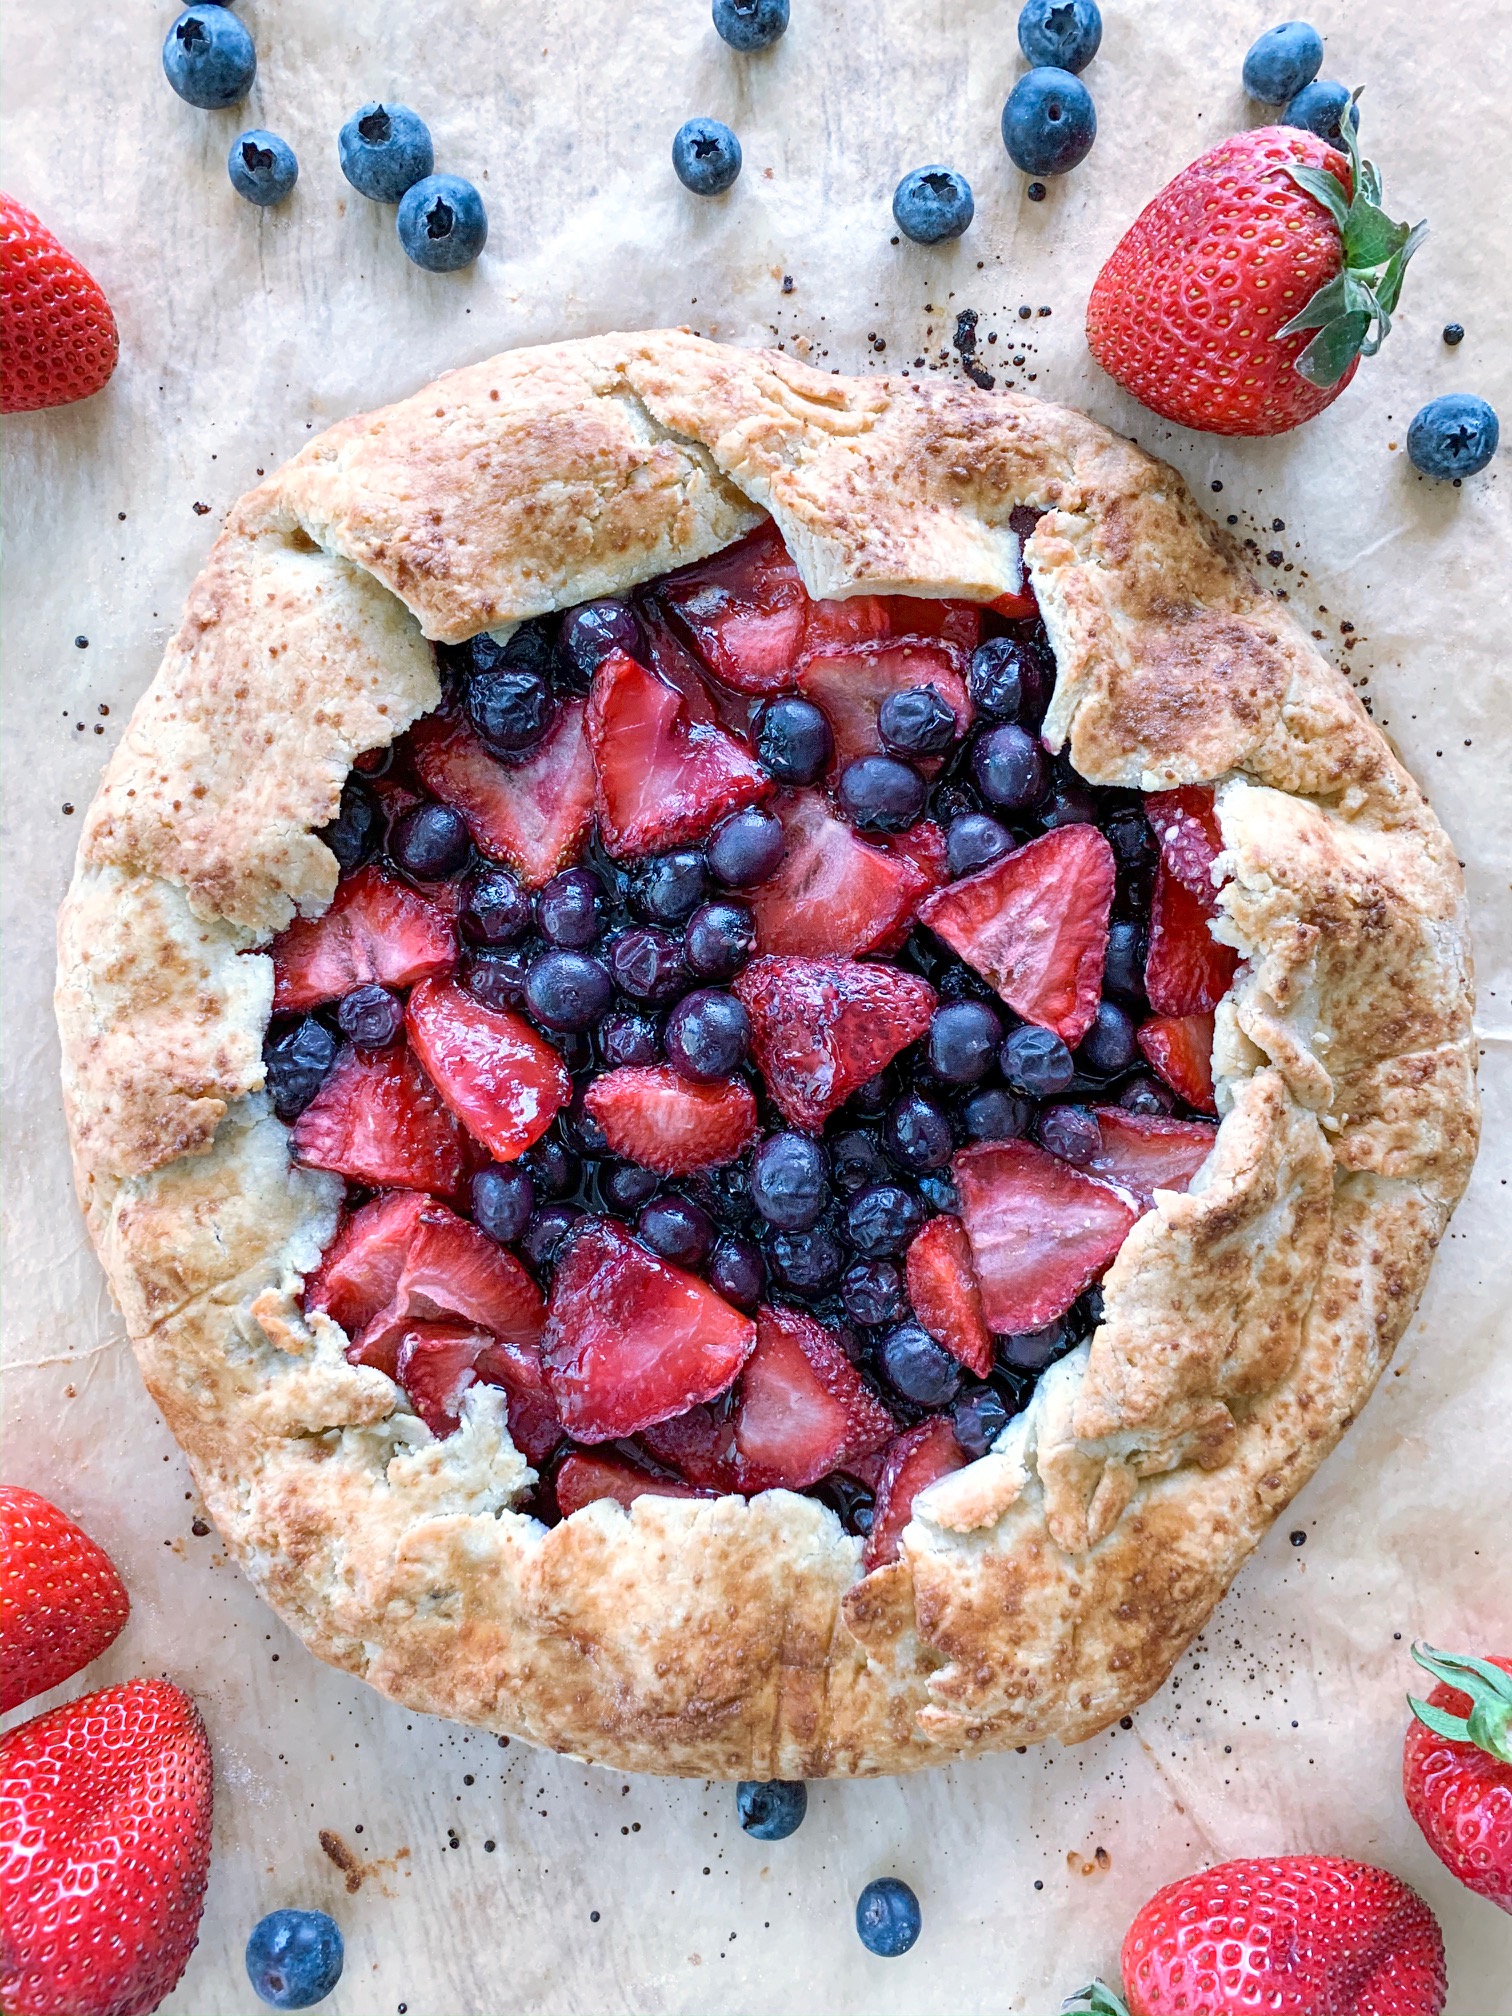 Galette with strawberries and blueberries